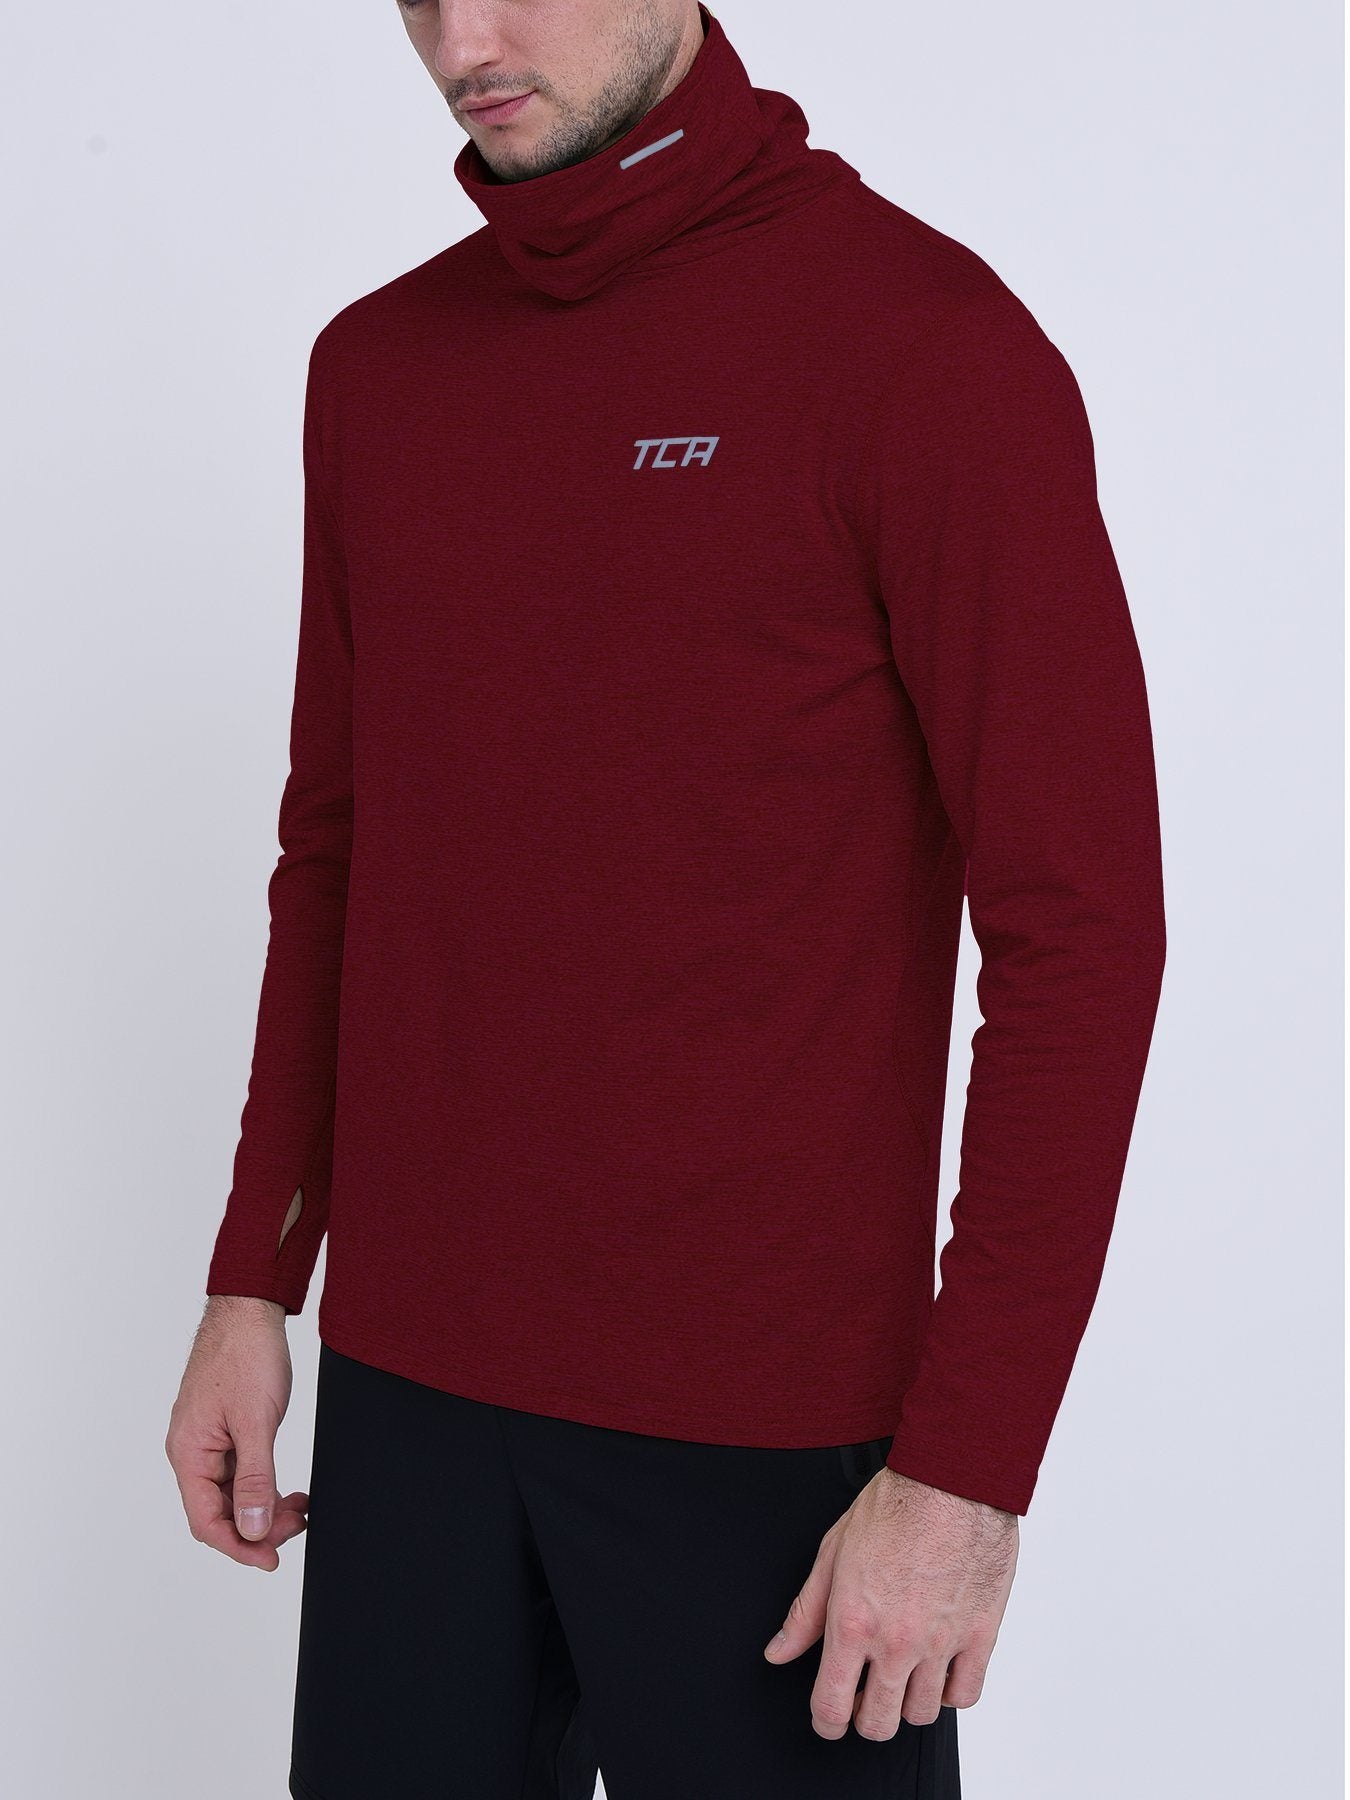 Warm-Up Thermal Long Sleeve Funnel Neck Top For Men With Brushed Inner Fabric, Thumbholes & Reflective Strips